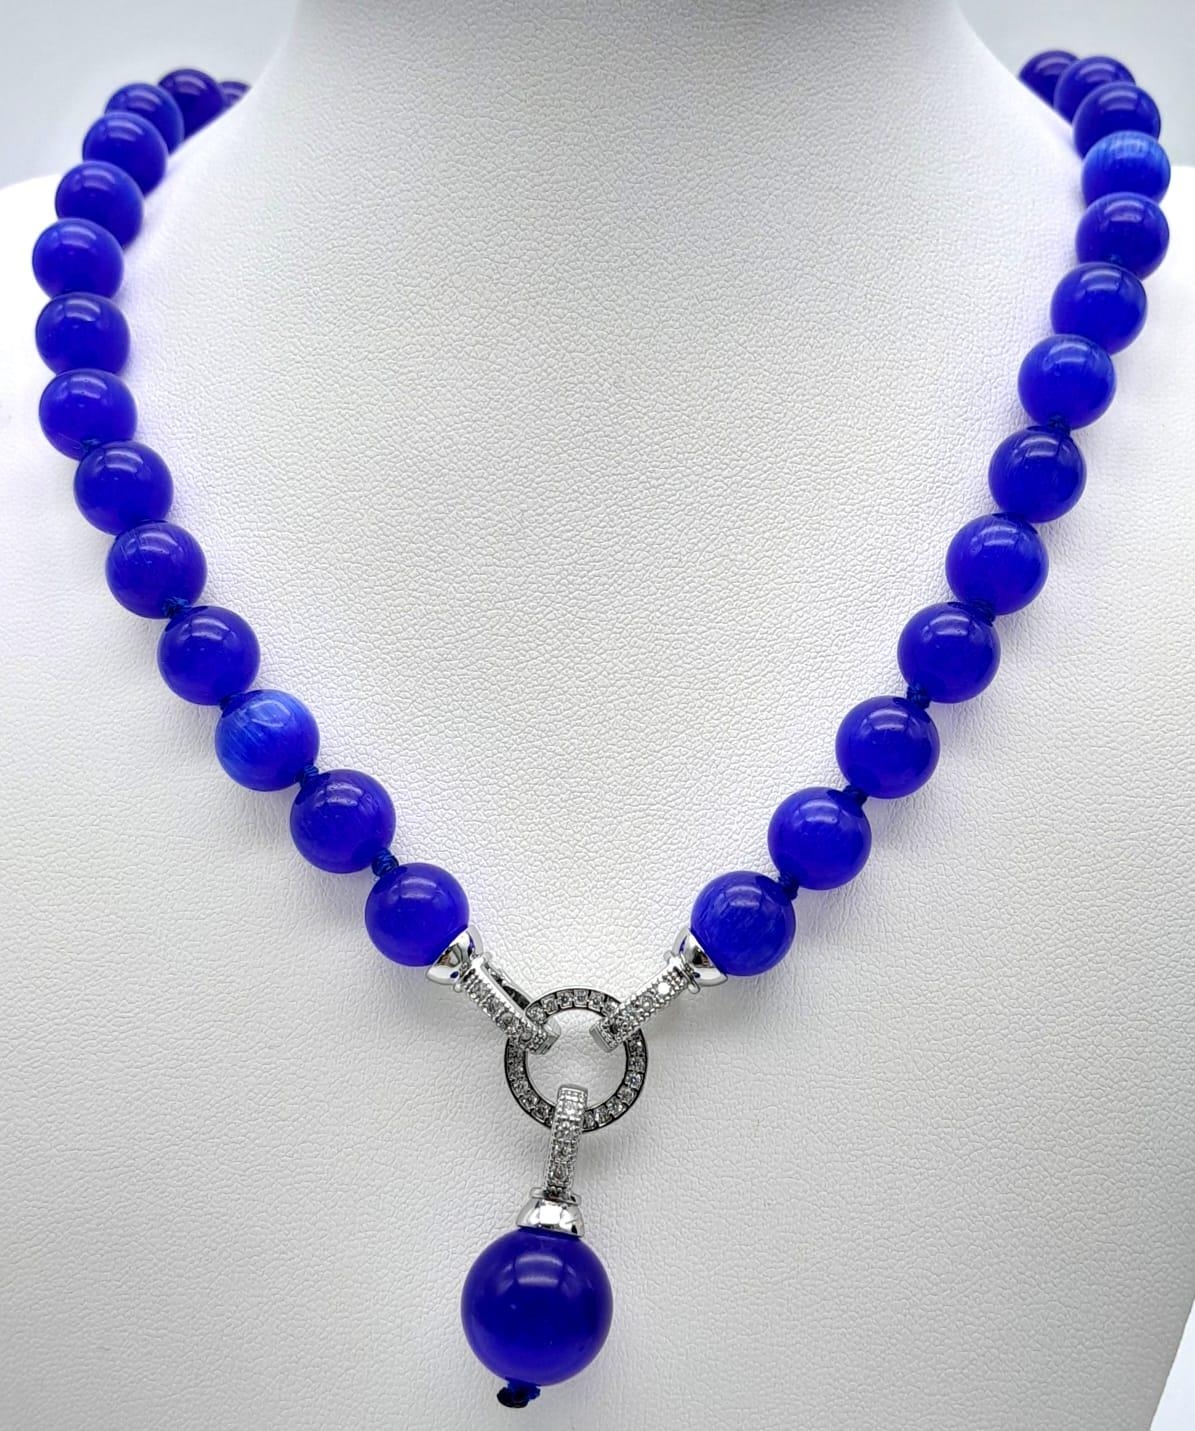 A Blue Cats Eye Bead Necklace with Hanging Pendant. 10mm and 14mm beads. 42cm necklace length.